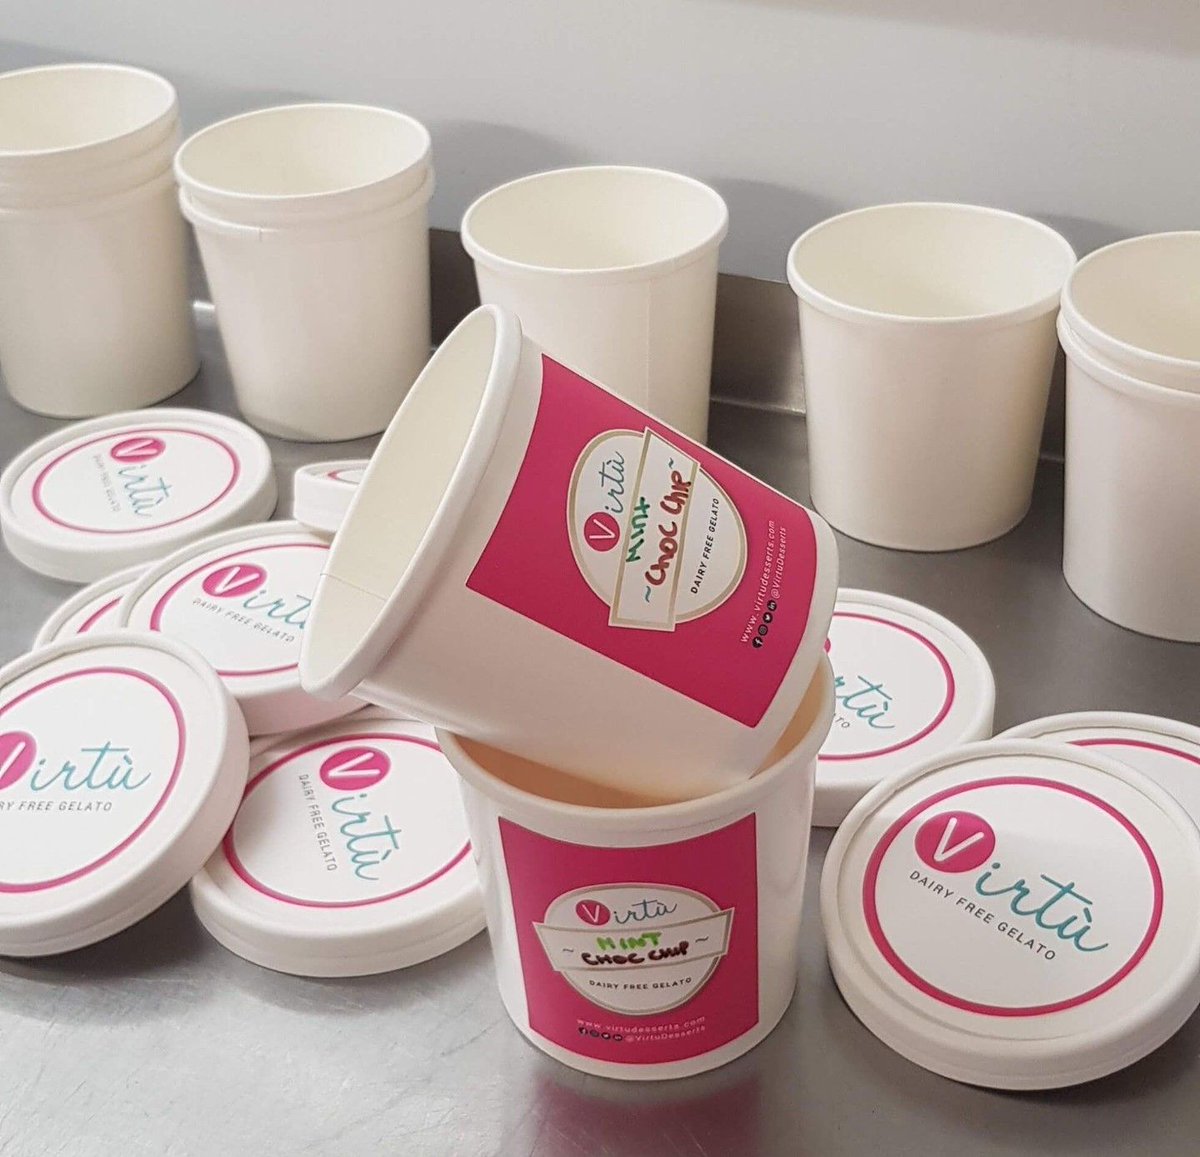 We were busy making gelato this week for both restaurant and website deliveries. Our good friends @amruthauk took hold of another big order as their customers can't get enough. Whoop Whoop! We were also treated to a little taster from their new menu - 😋